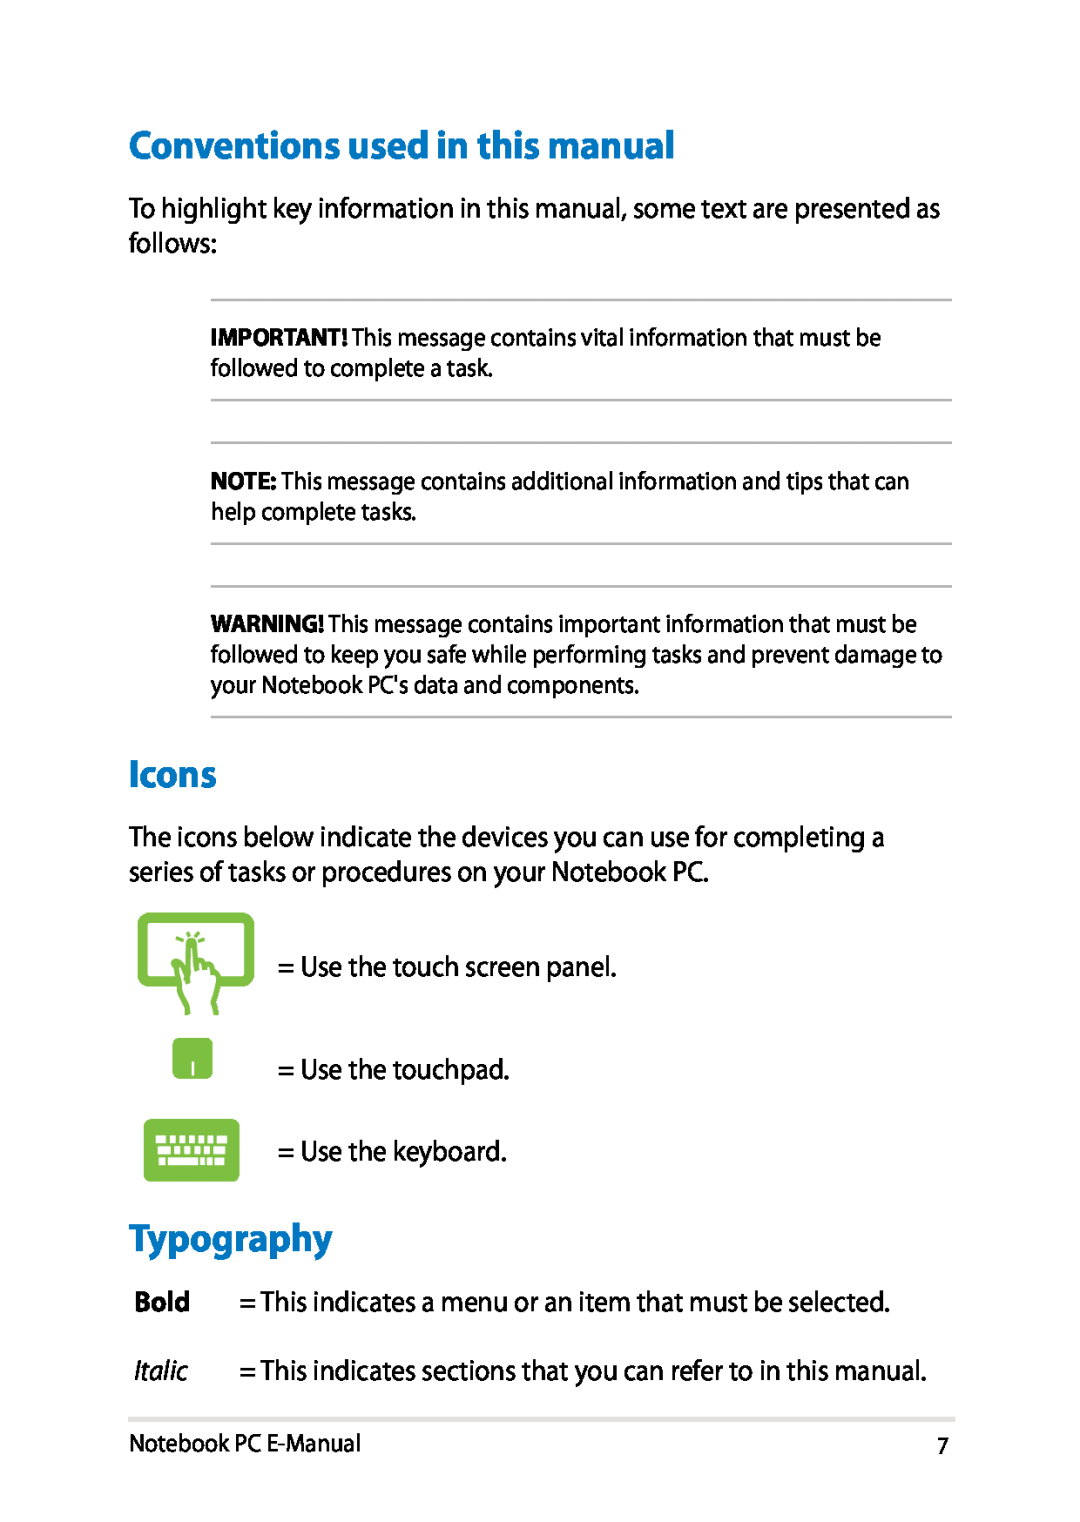 Asus E8438 Conventions used in this manual, Icons, Typography 